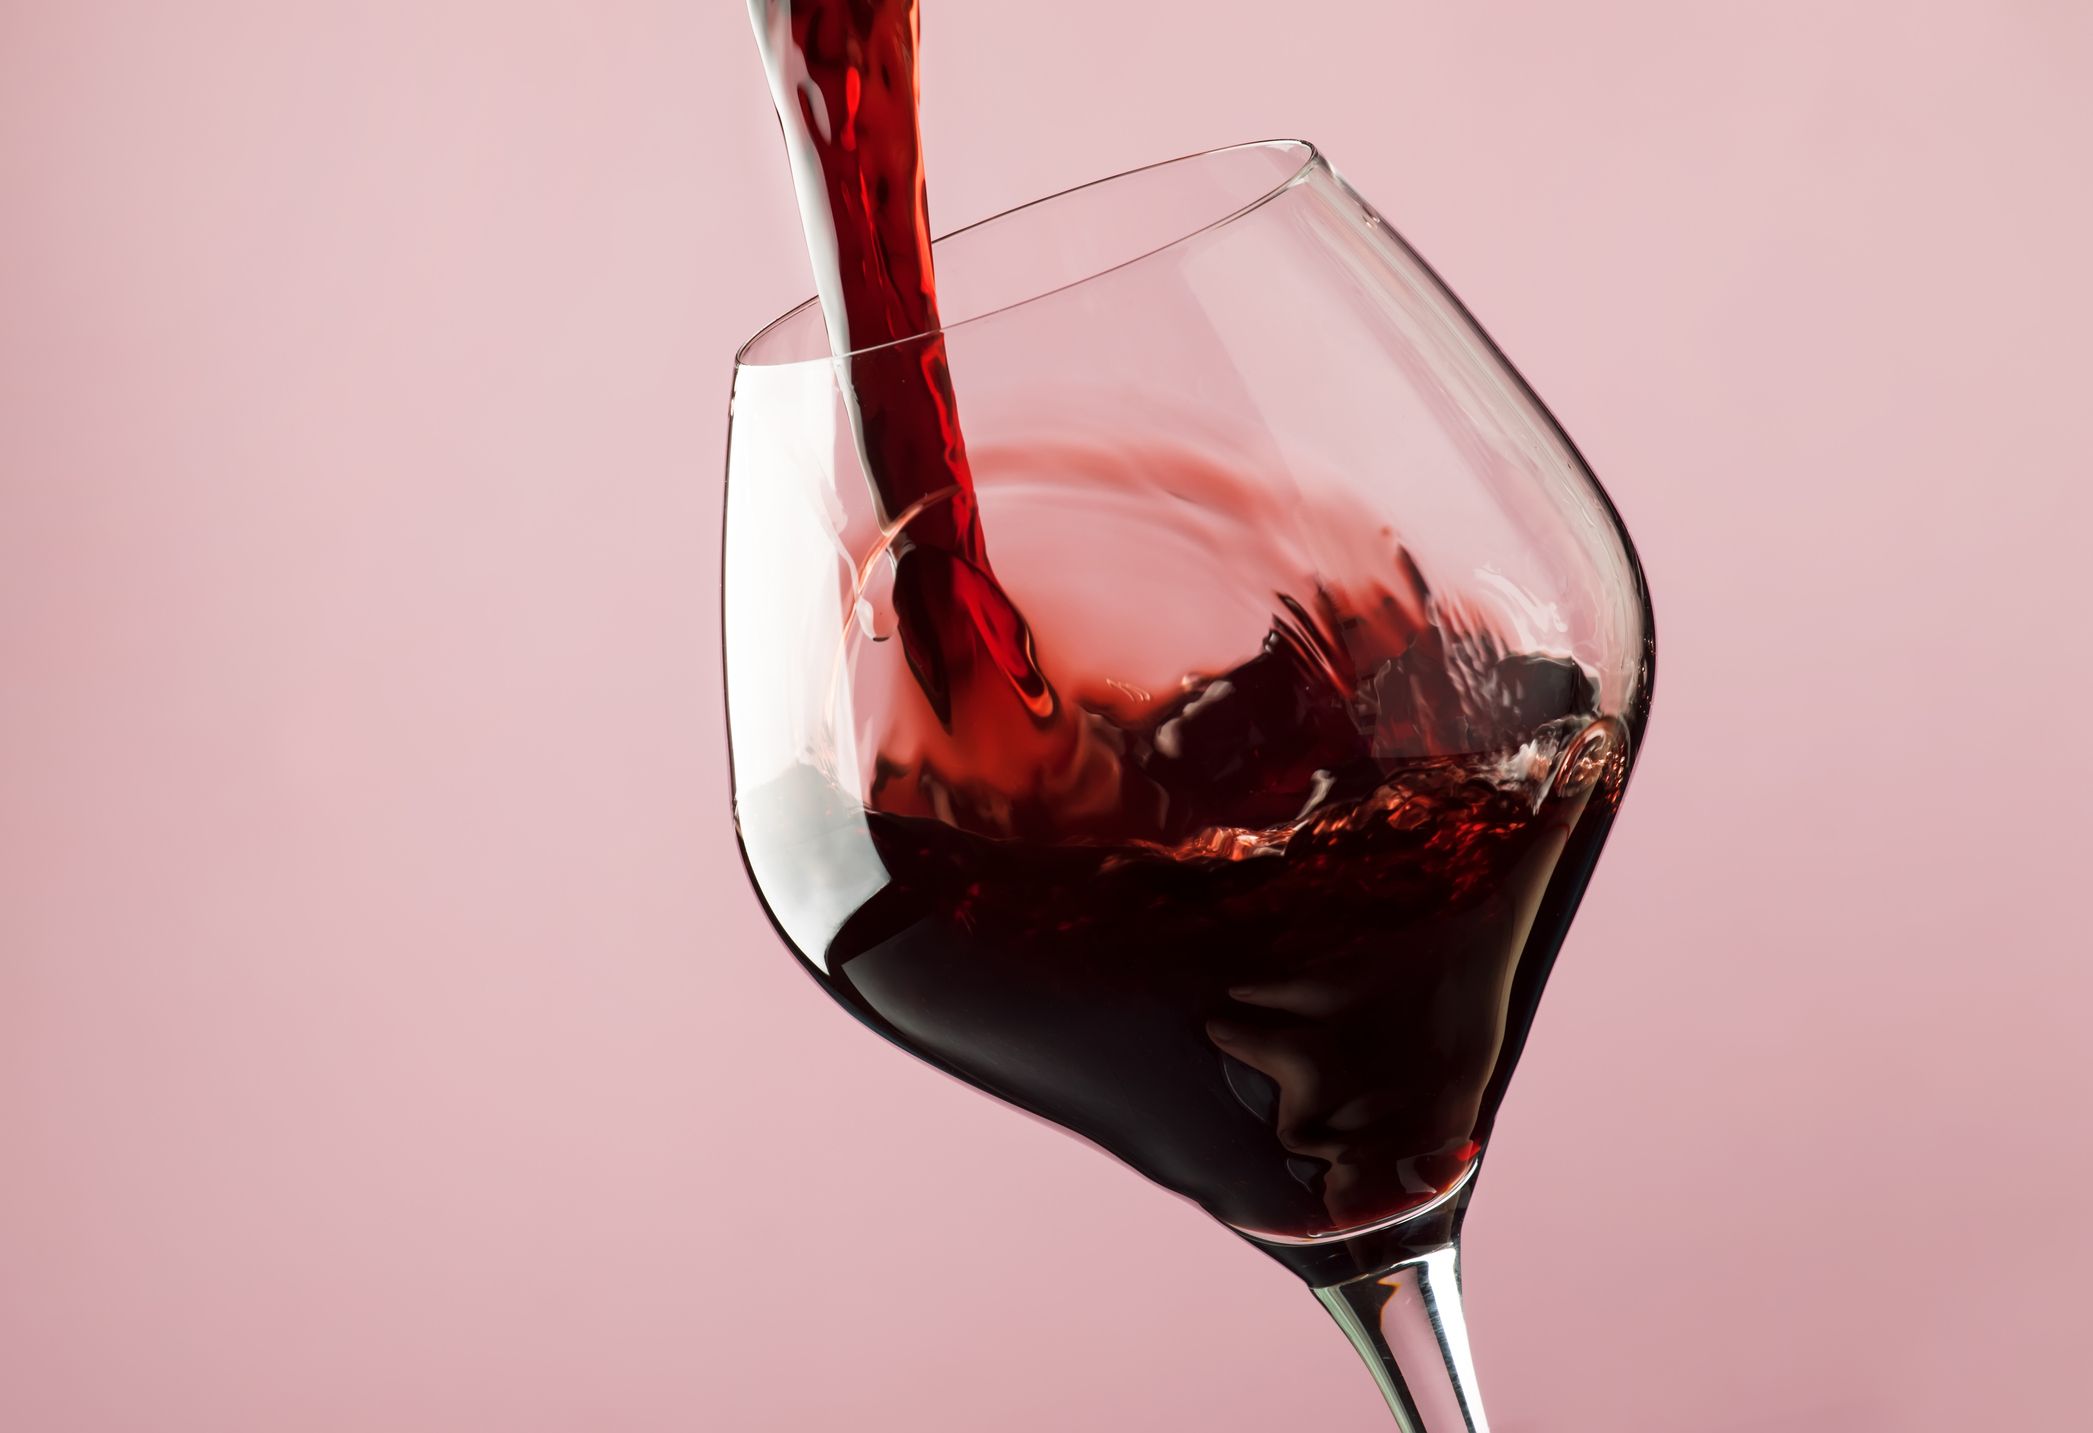 5 Red Wine Health Benefits - Why to Drink Red Wine